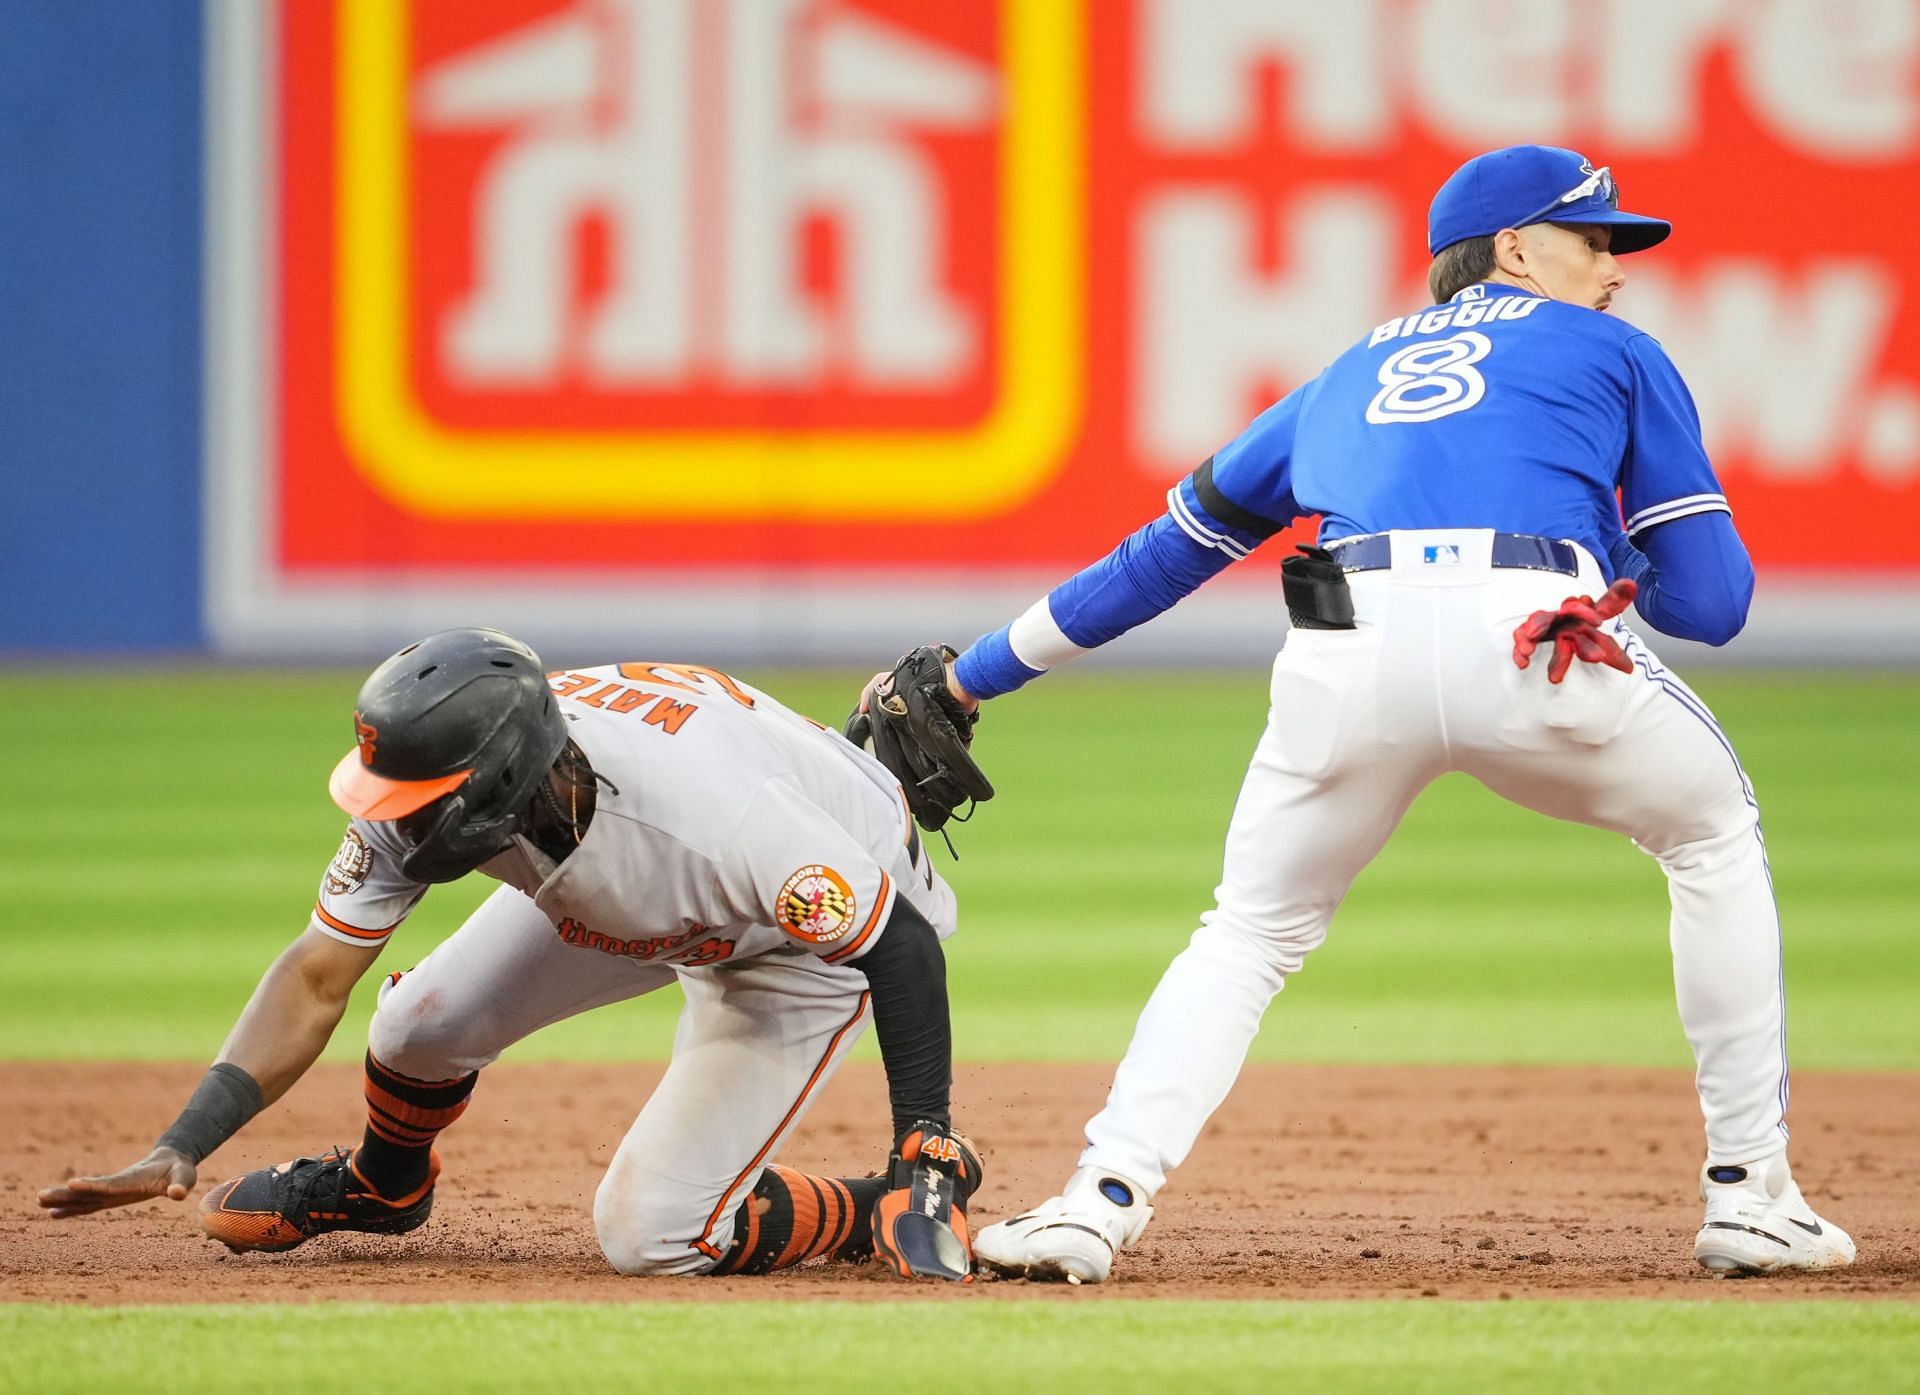 The Orioles and Blue Jays play Wednesday.